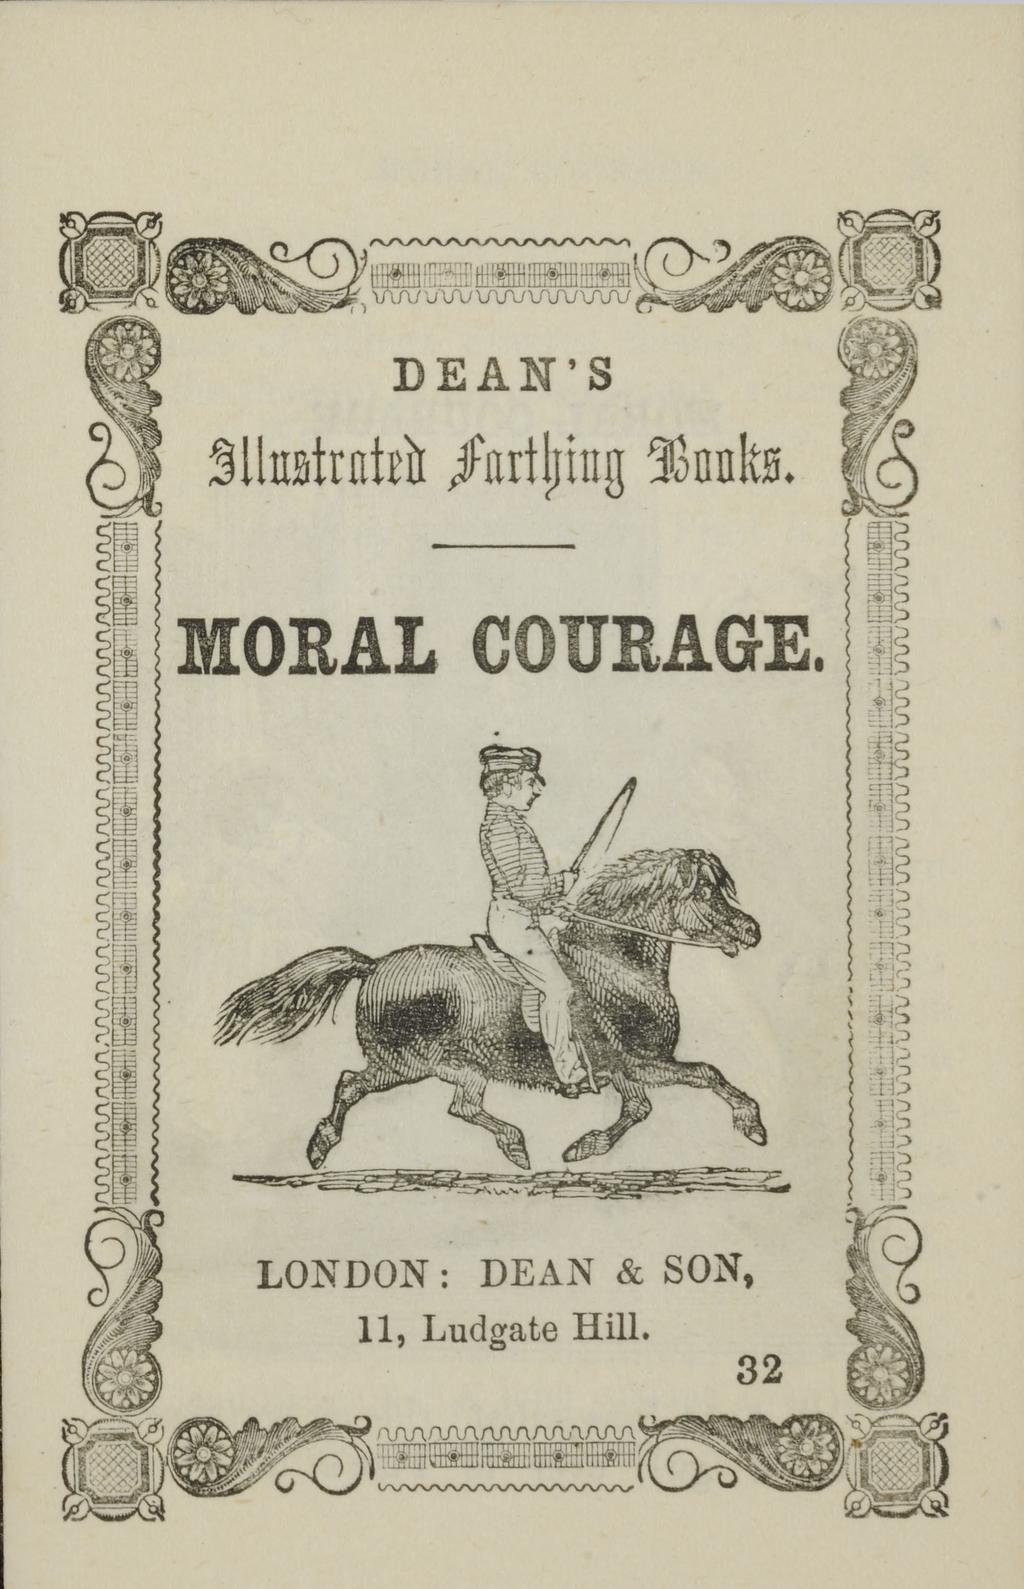 D E A N S Illustrated Farthing Books.